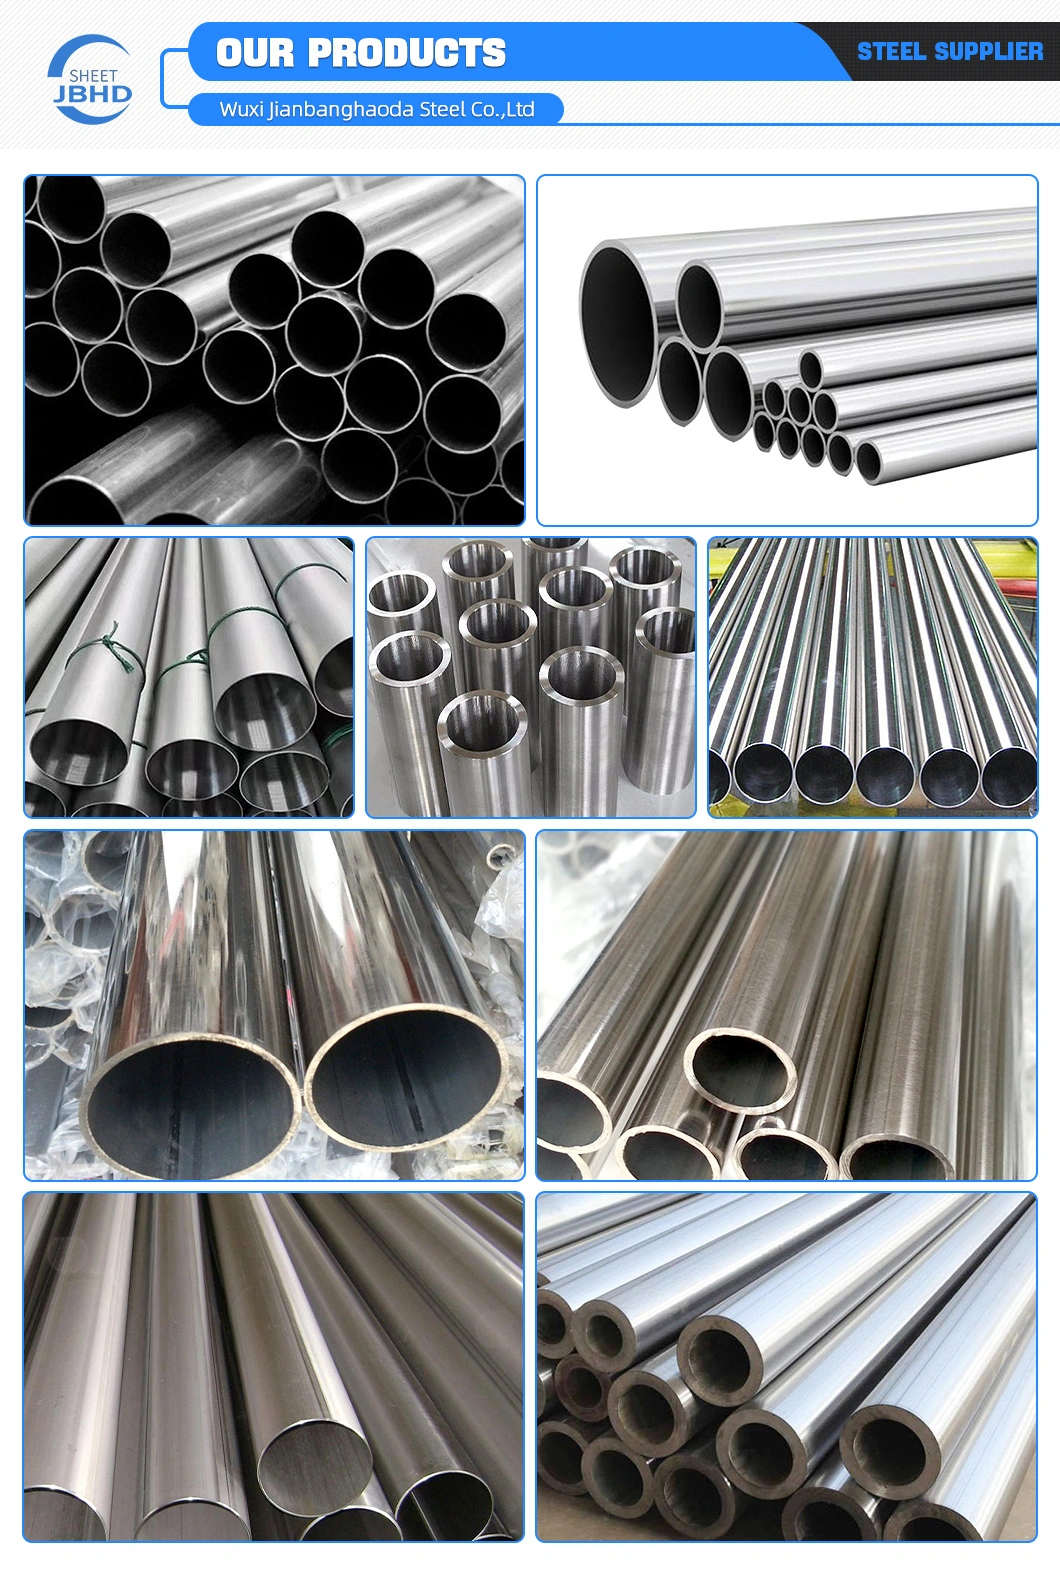 Factory Price Hastelloy C-22 (N06022) , Hastelloy G30 (N06030) Alloy Tube Inconel 718 Nickel Alloy Seamless Pipe